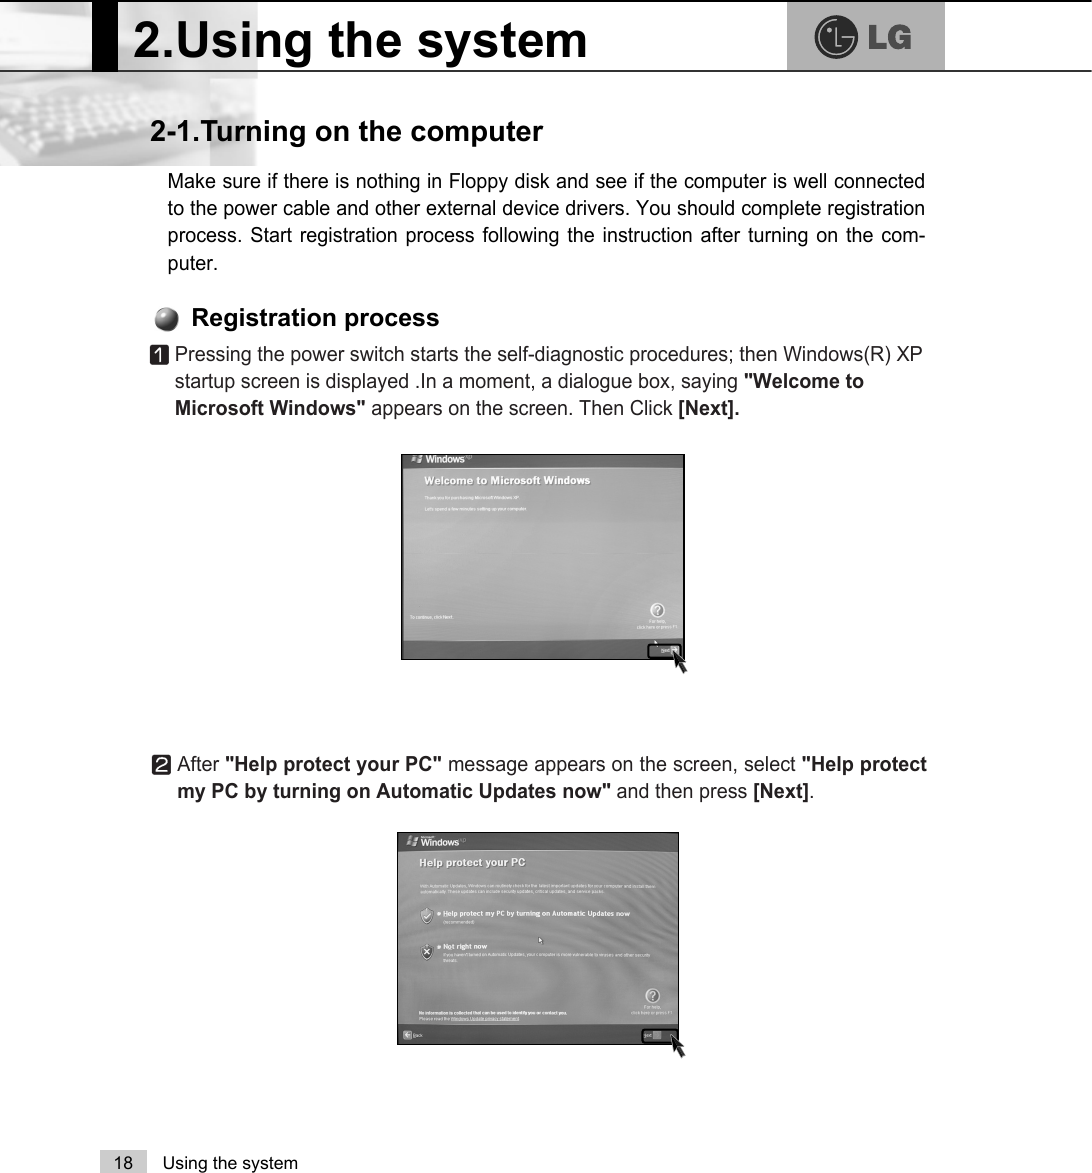 2.Using the system18 Using the systemMake sure if there is nothing in Floppy disk and see if the computer is well connectedto the power cable and other external device drivers. You should complete registrationprocess. Start registration process following the instruction after turning on the com-puter.2-1.Turning on the computerⓞPressing the power switch starts the self-diagnostic procedures; then Windows(R) XPstartup screen is displayed .In a moment, a dialogue box, saying &quot;Welcome toMicrosoft Windows&quot; appears on the screen. Then Click [Next].Registration processⓟAfter &quot;Help protect your PC&quot; message appears on the screen, select &quot;Help protectmy PC by turning on Automatic Updates now&quot; and then press [Next]. 